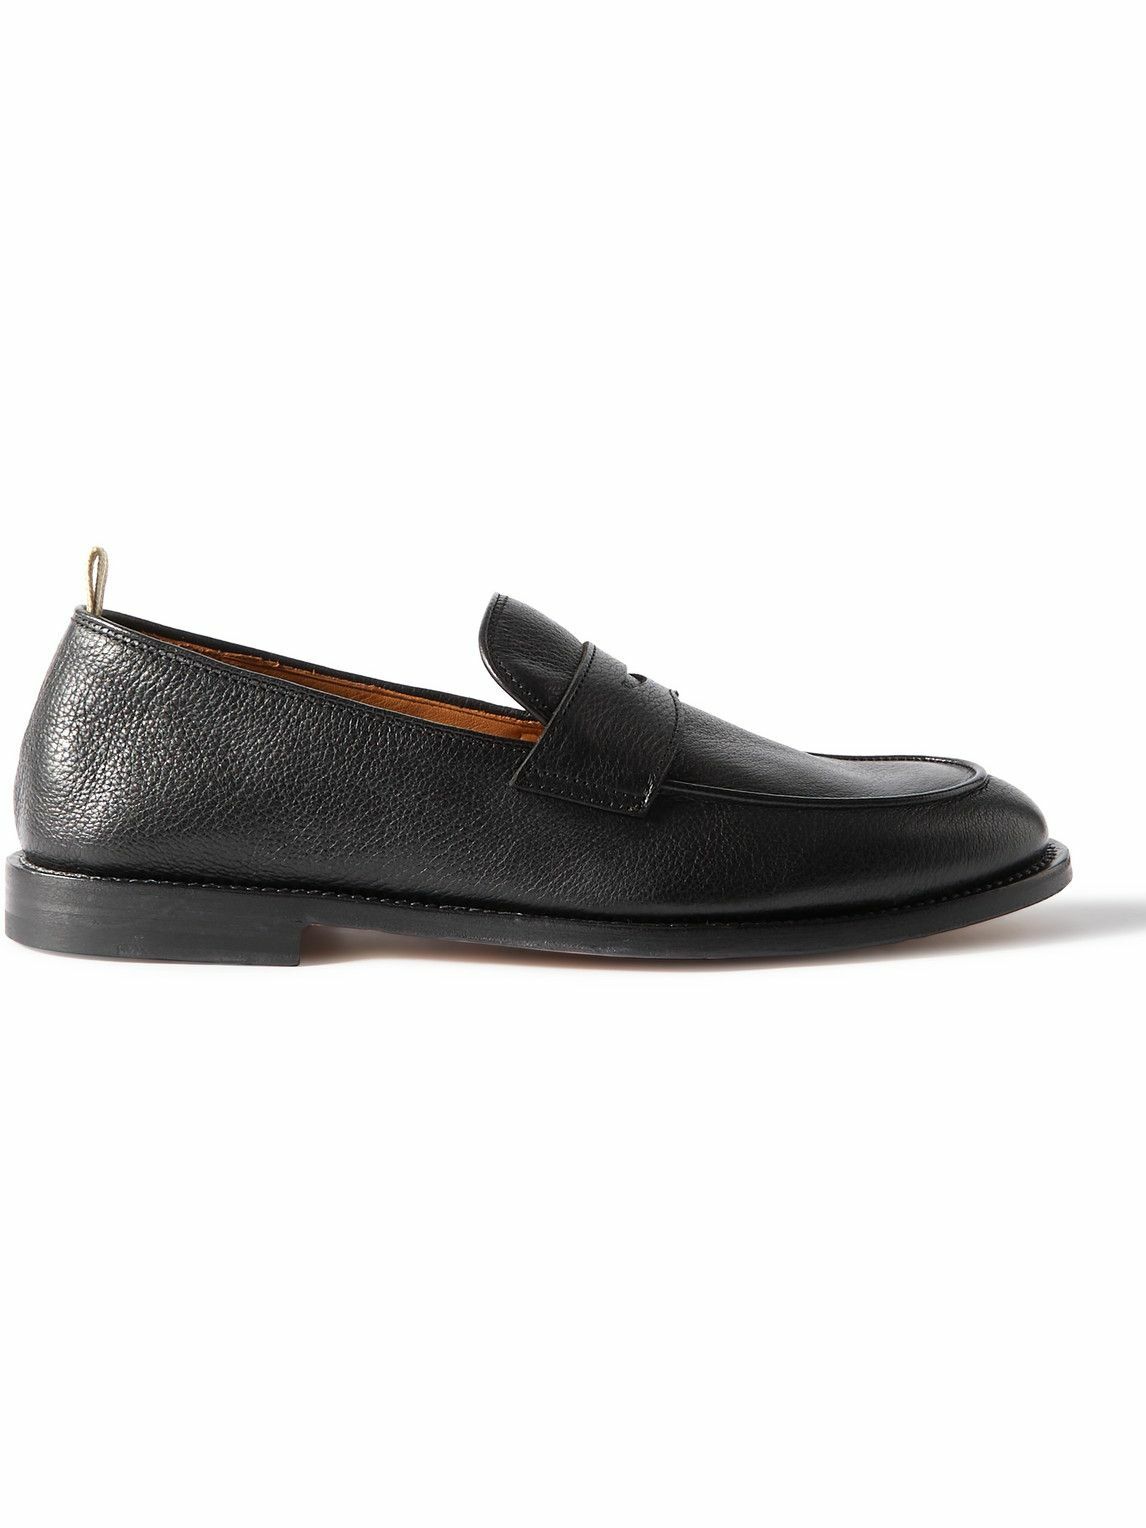 Officine Creative - Opera Full-Grain Leather Penny Loafers - Black ...